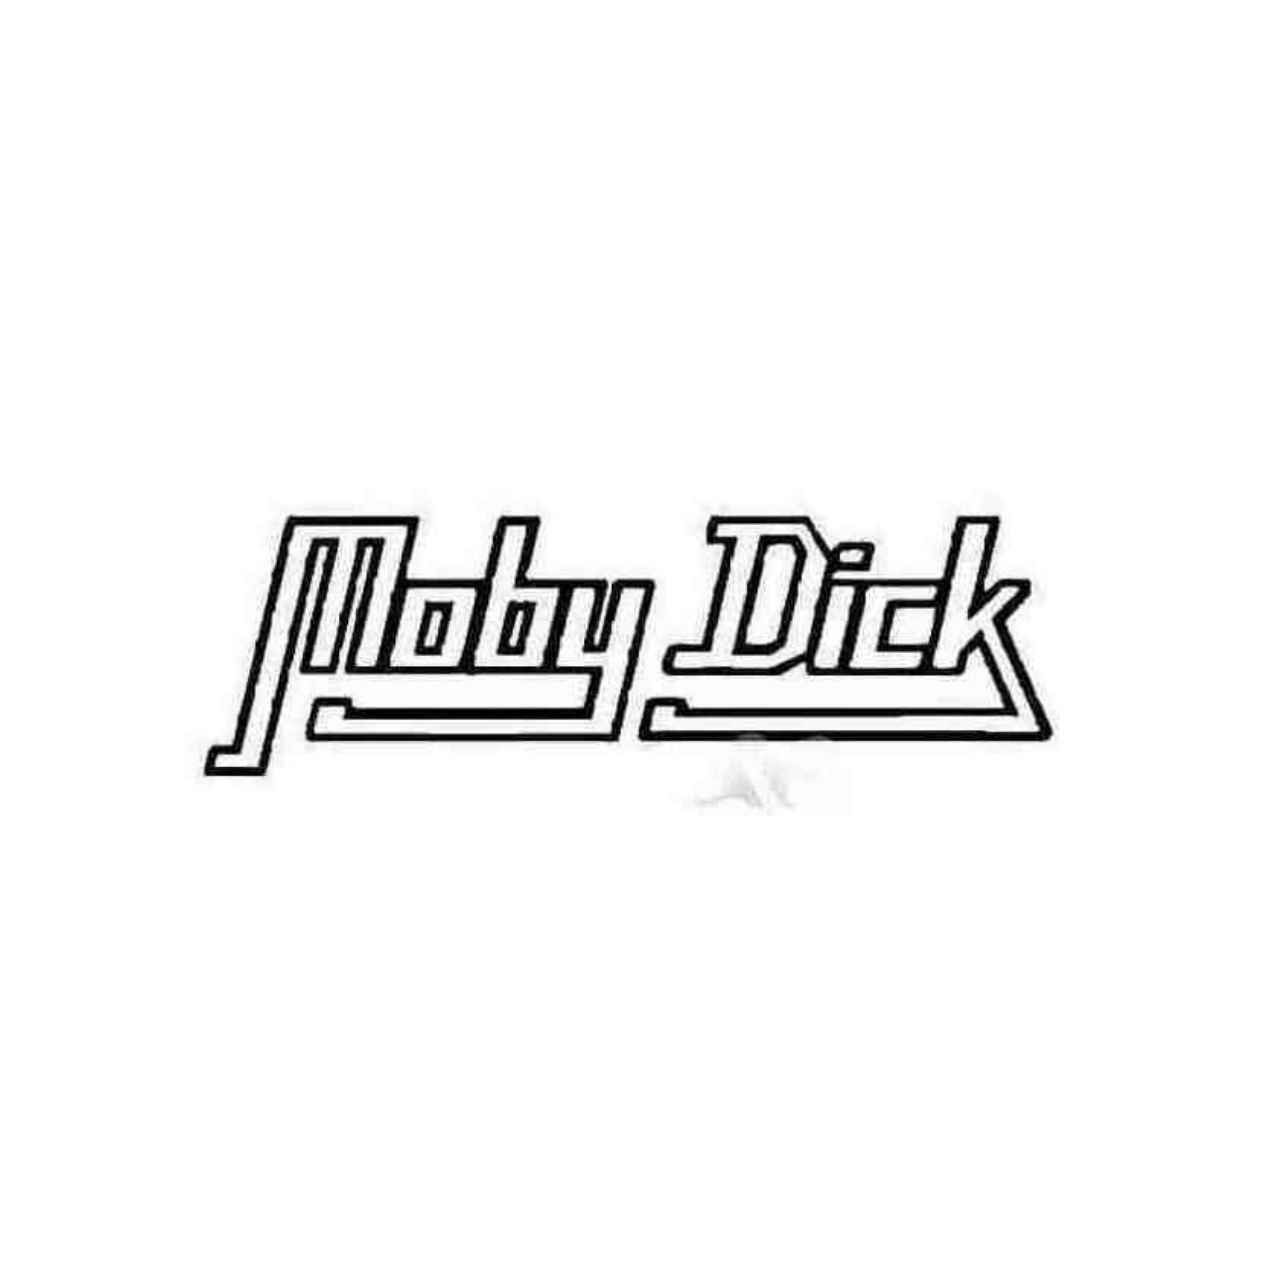 Moby Logo - Moby Dick Decal Sticker